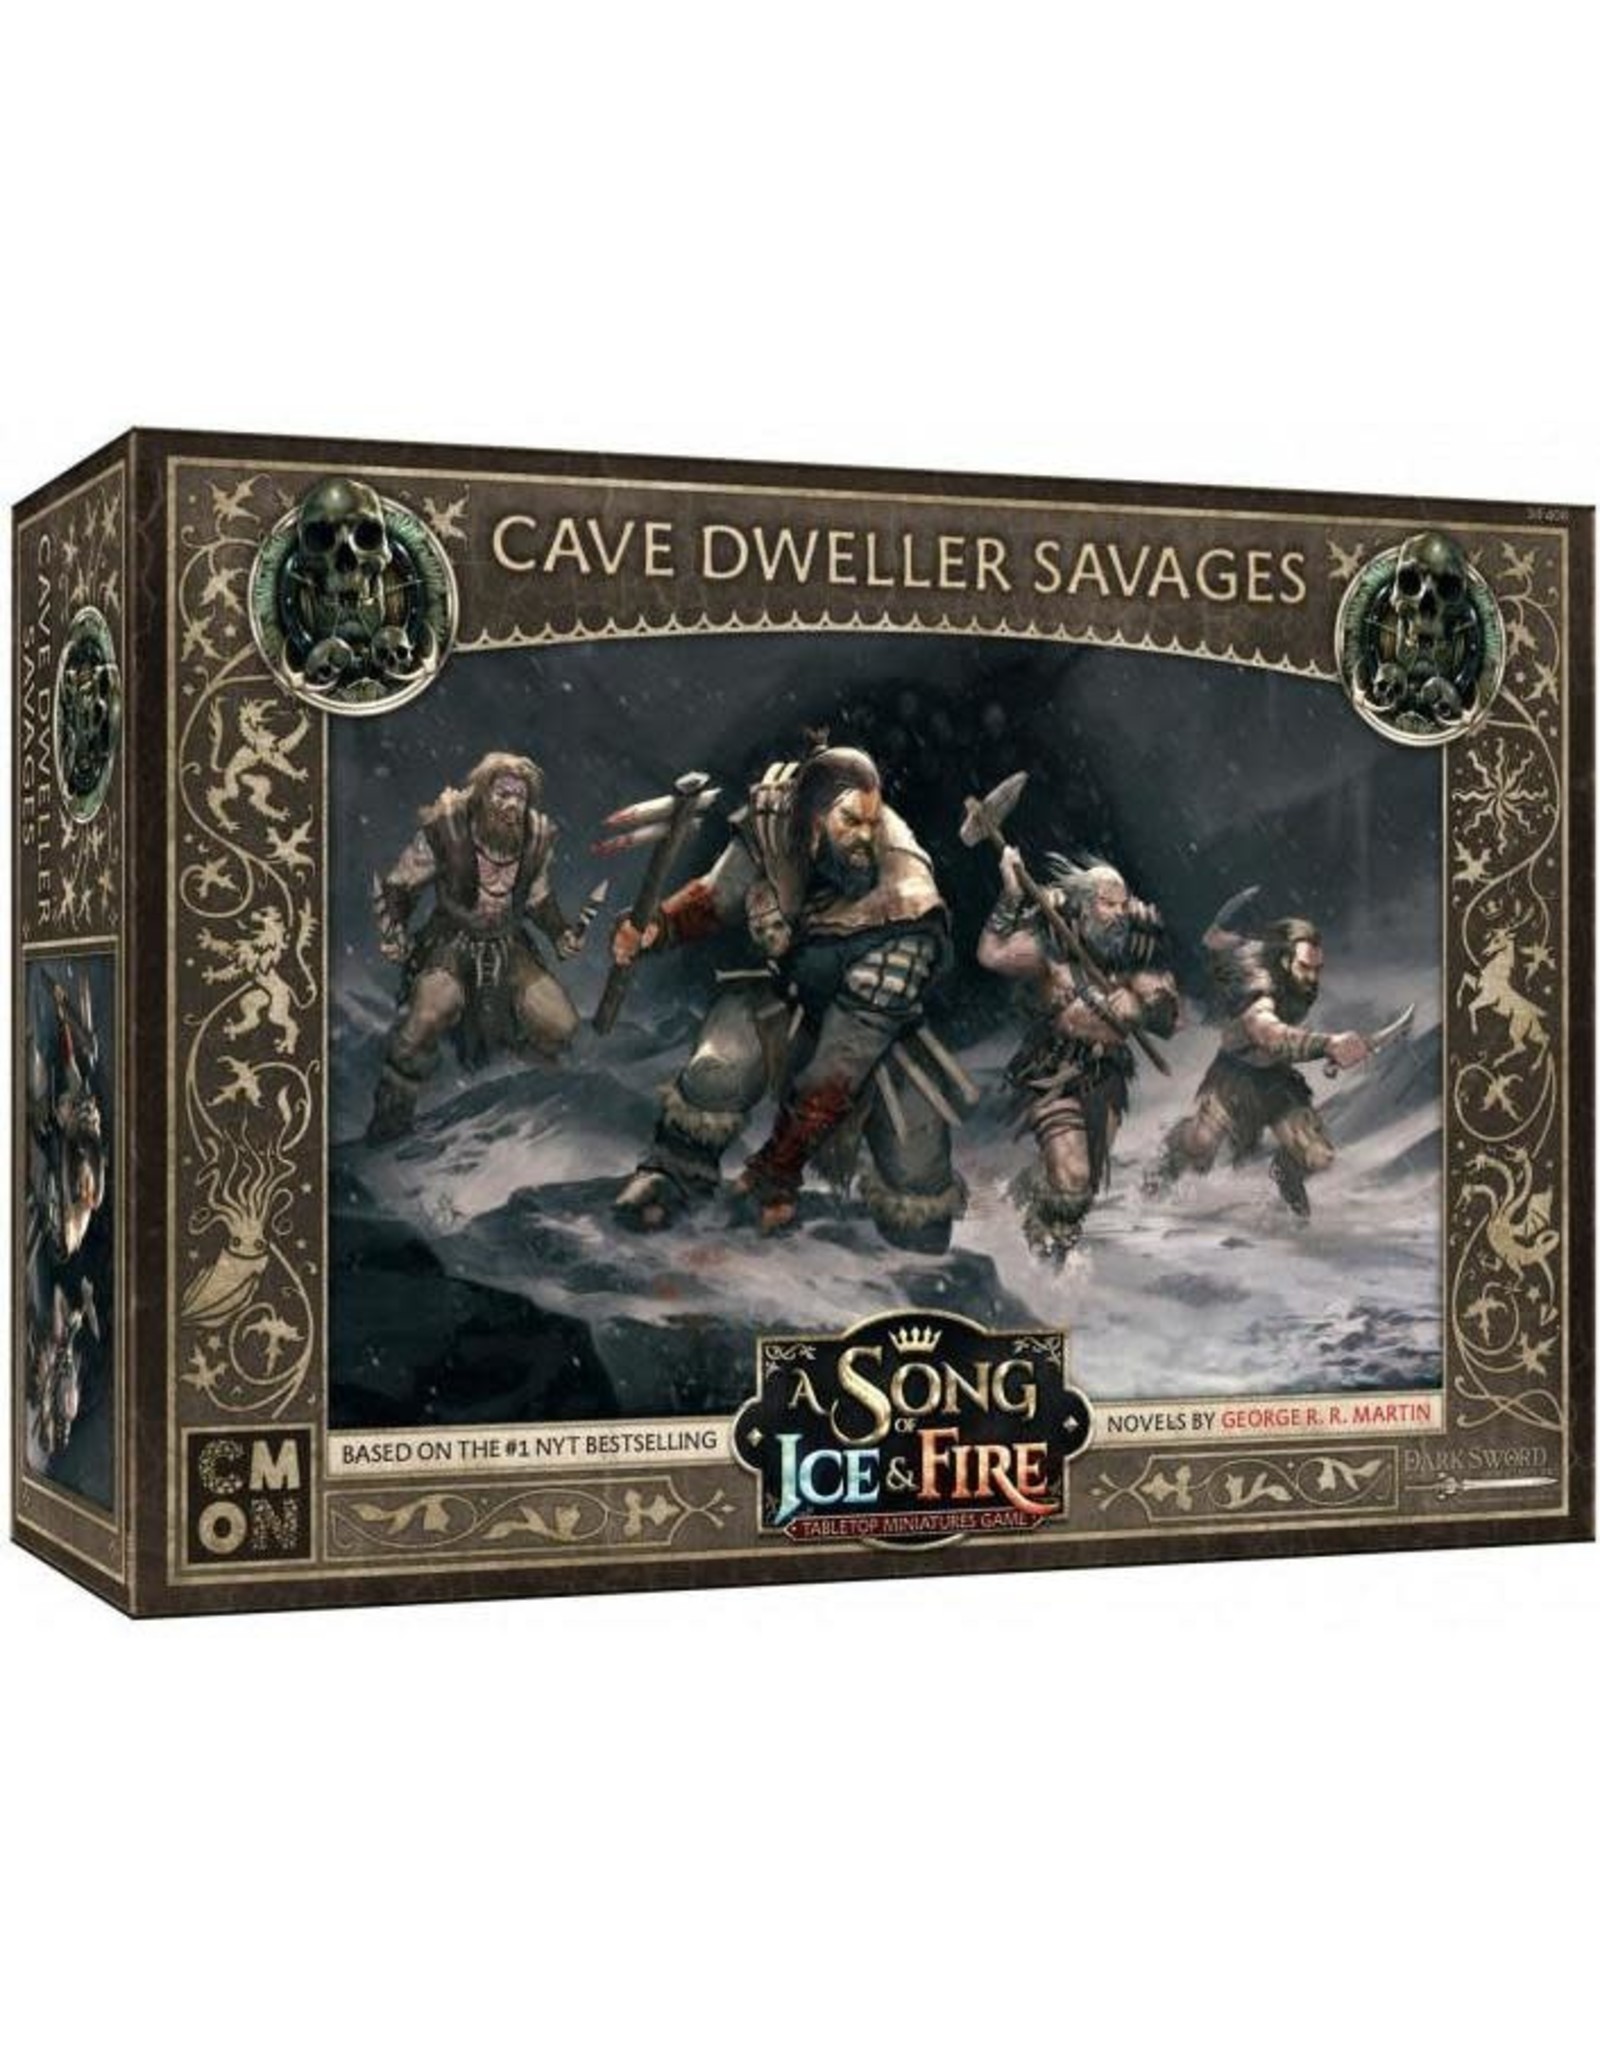 CMON A SONG OF ICE & FIRE: FREE FOLK CAVE DWELLER SAVAGES